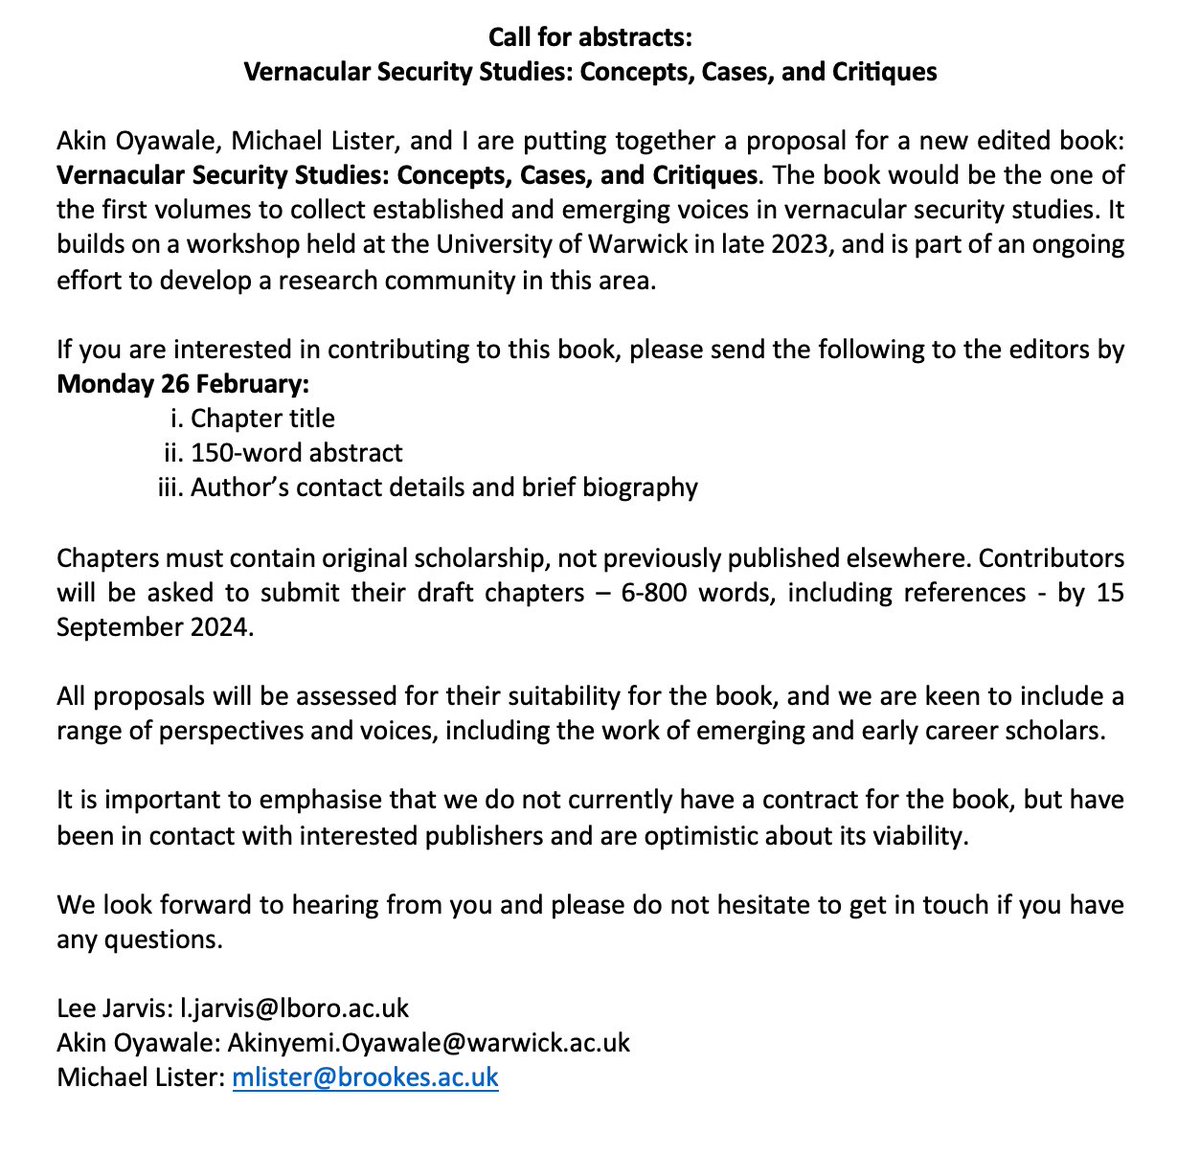 Call for abstracts for a new book project on #vernacular #security. Please do get in touch with a proposed abstract or any questions: